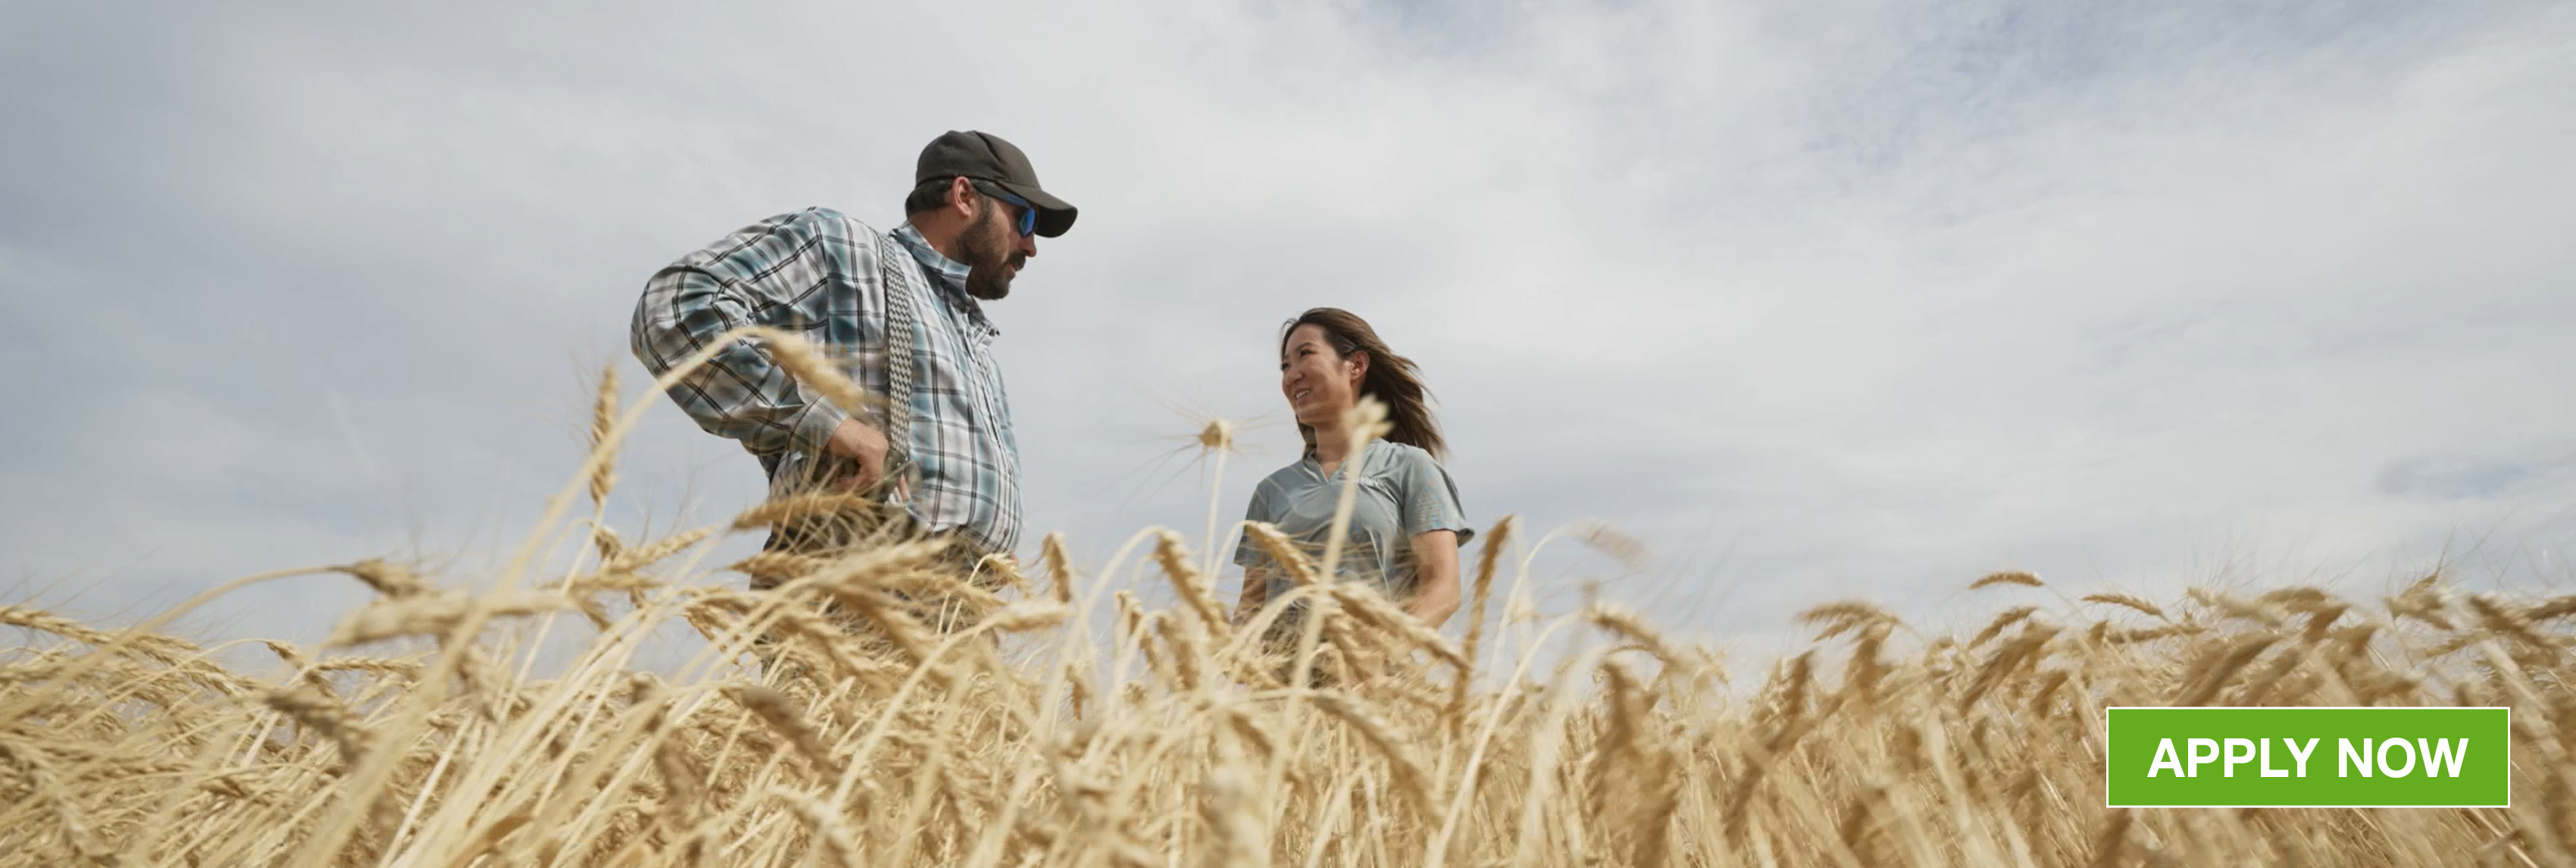 a man and woman in a wheat field